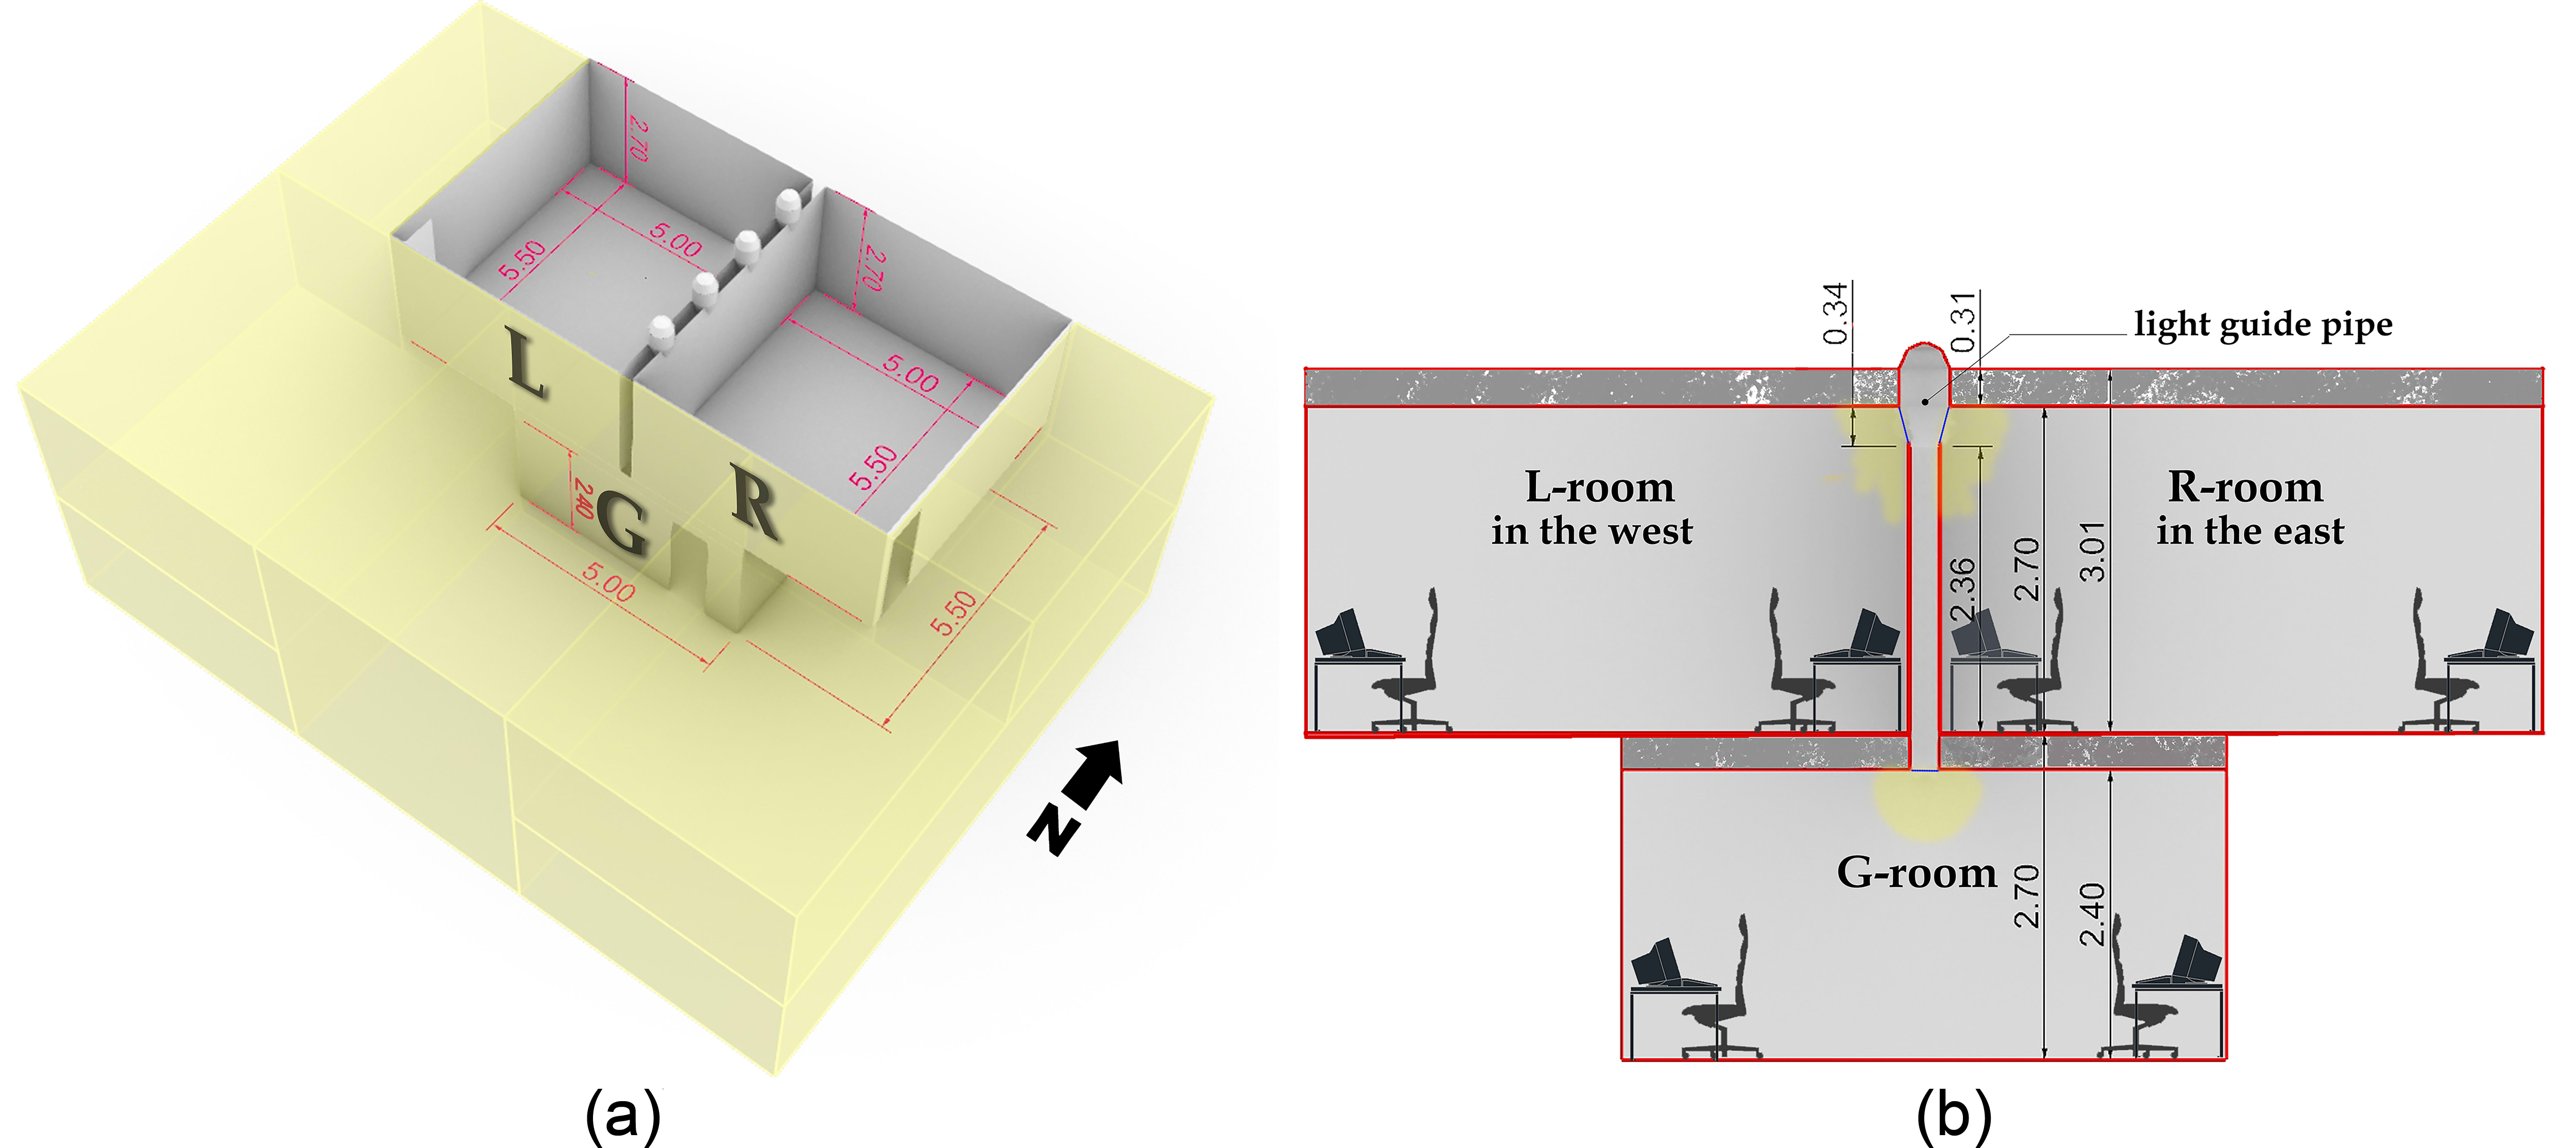 (a) Isometric image of the case study (b) section of the case study.